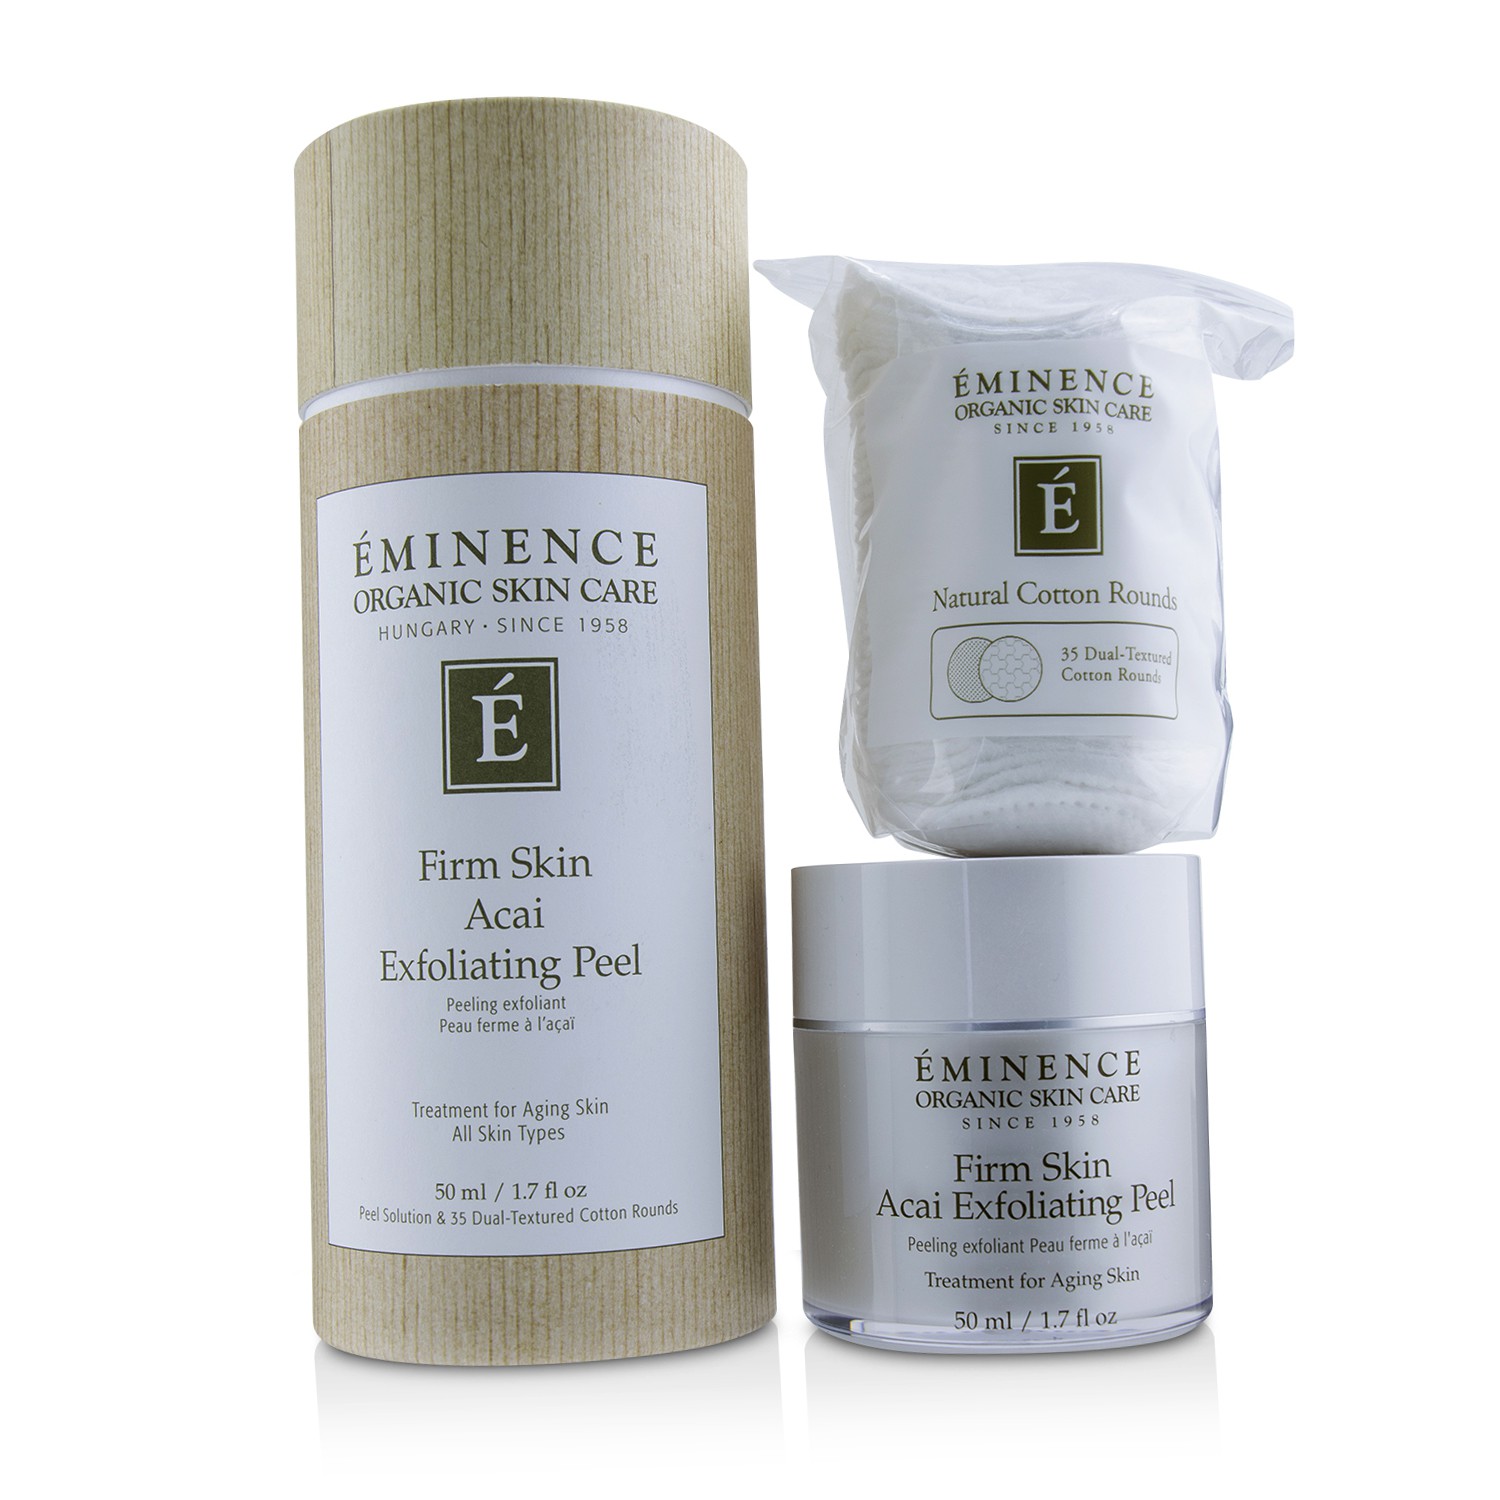 Firm Skin Acai Exfoliating Peel (with 35 Dual-Textured Cotton Rounds) Eminence Image